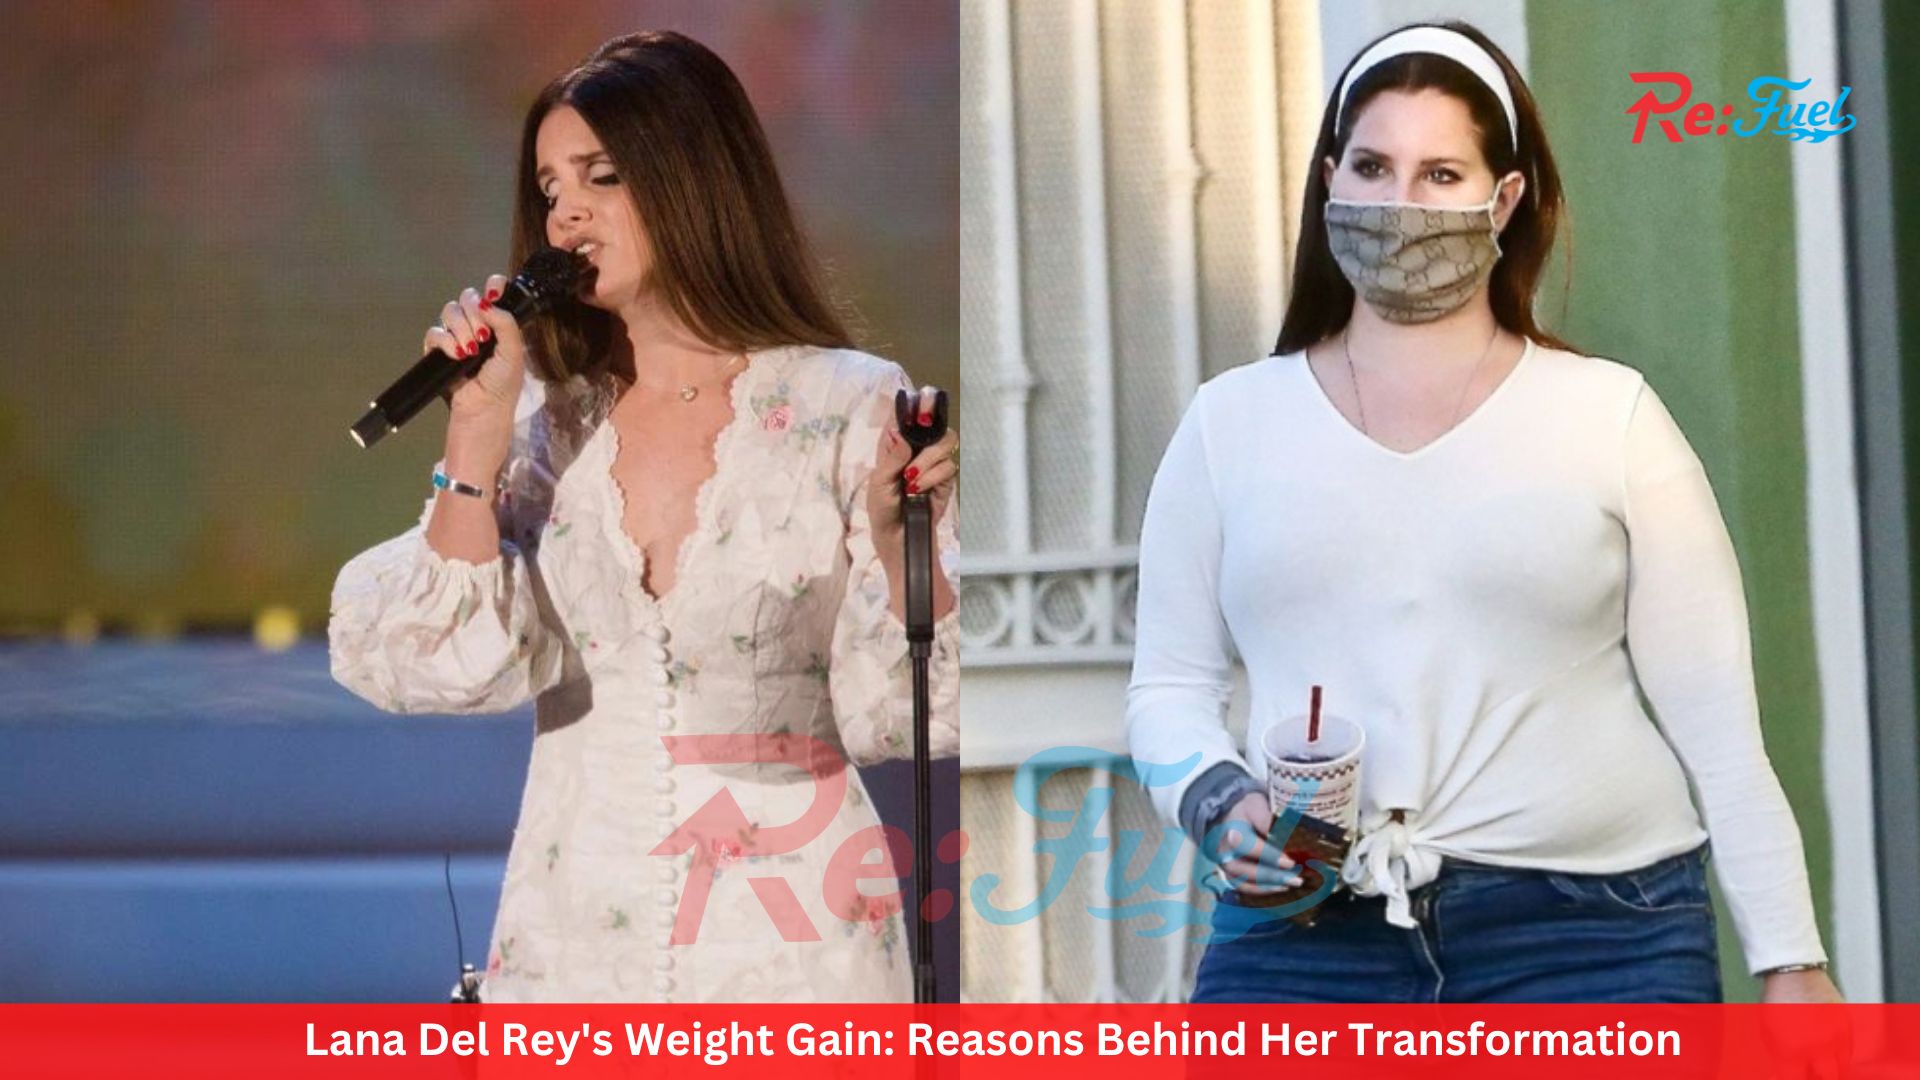 Lana Del Rey's Weight Gain: Reasons Behind Her Transformation